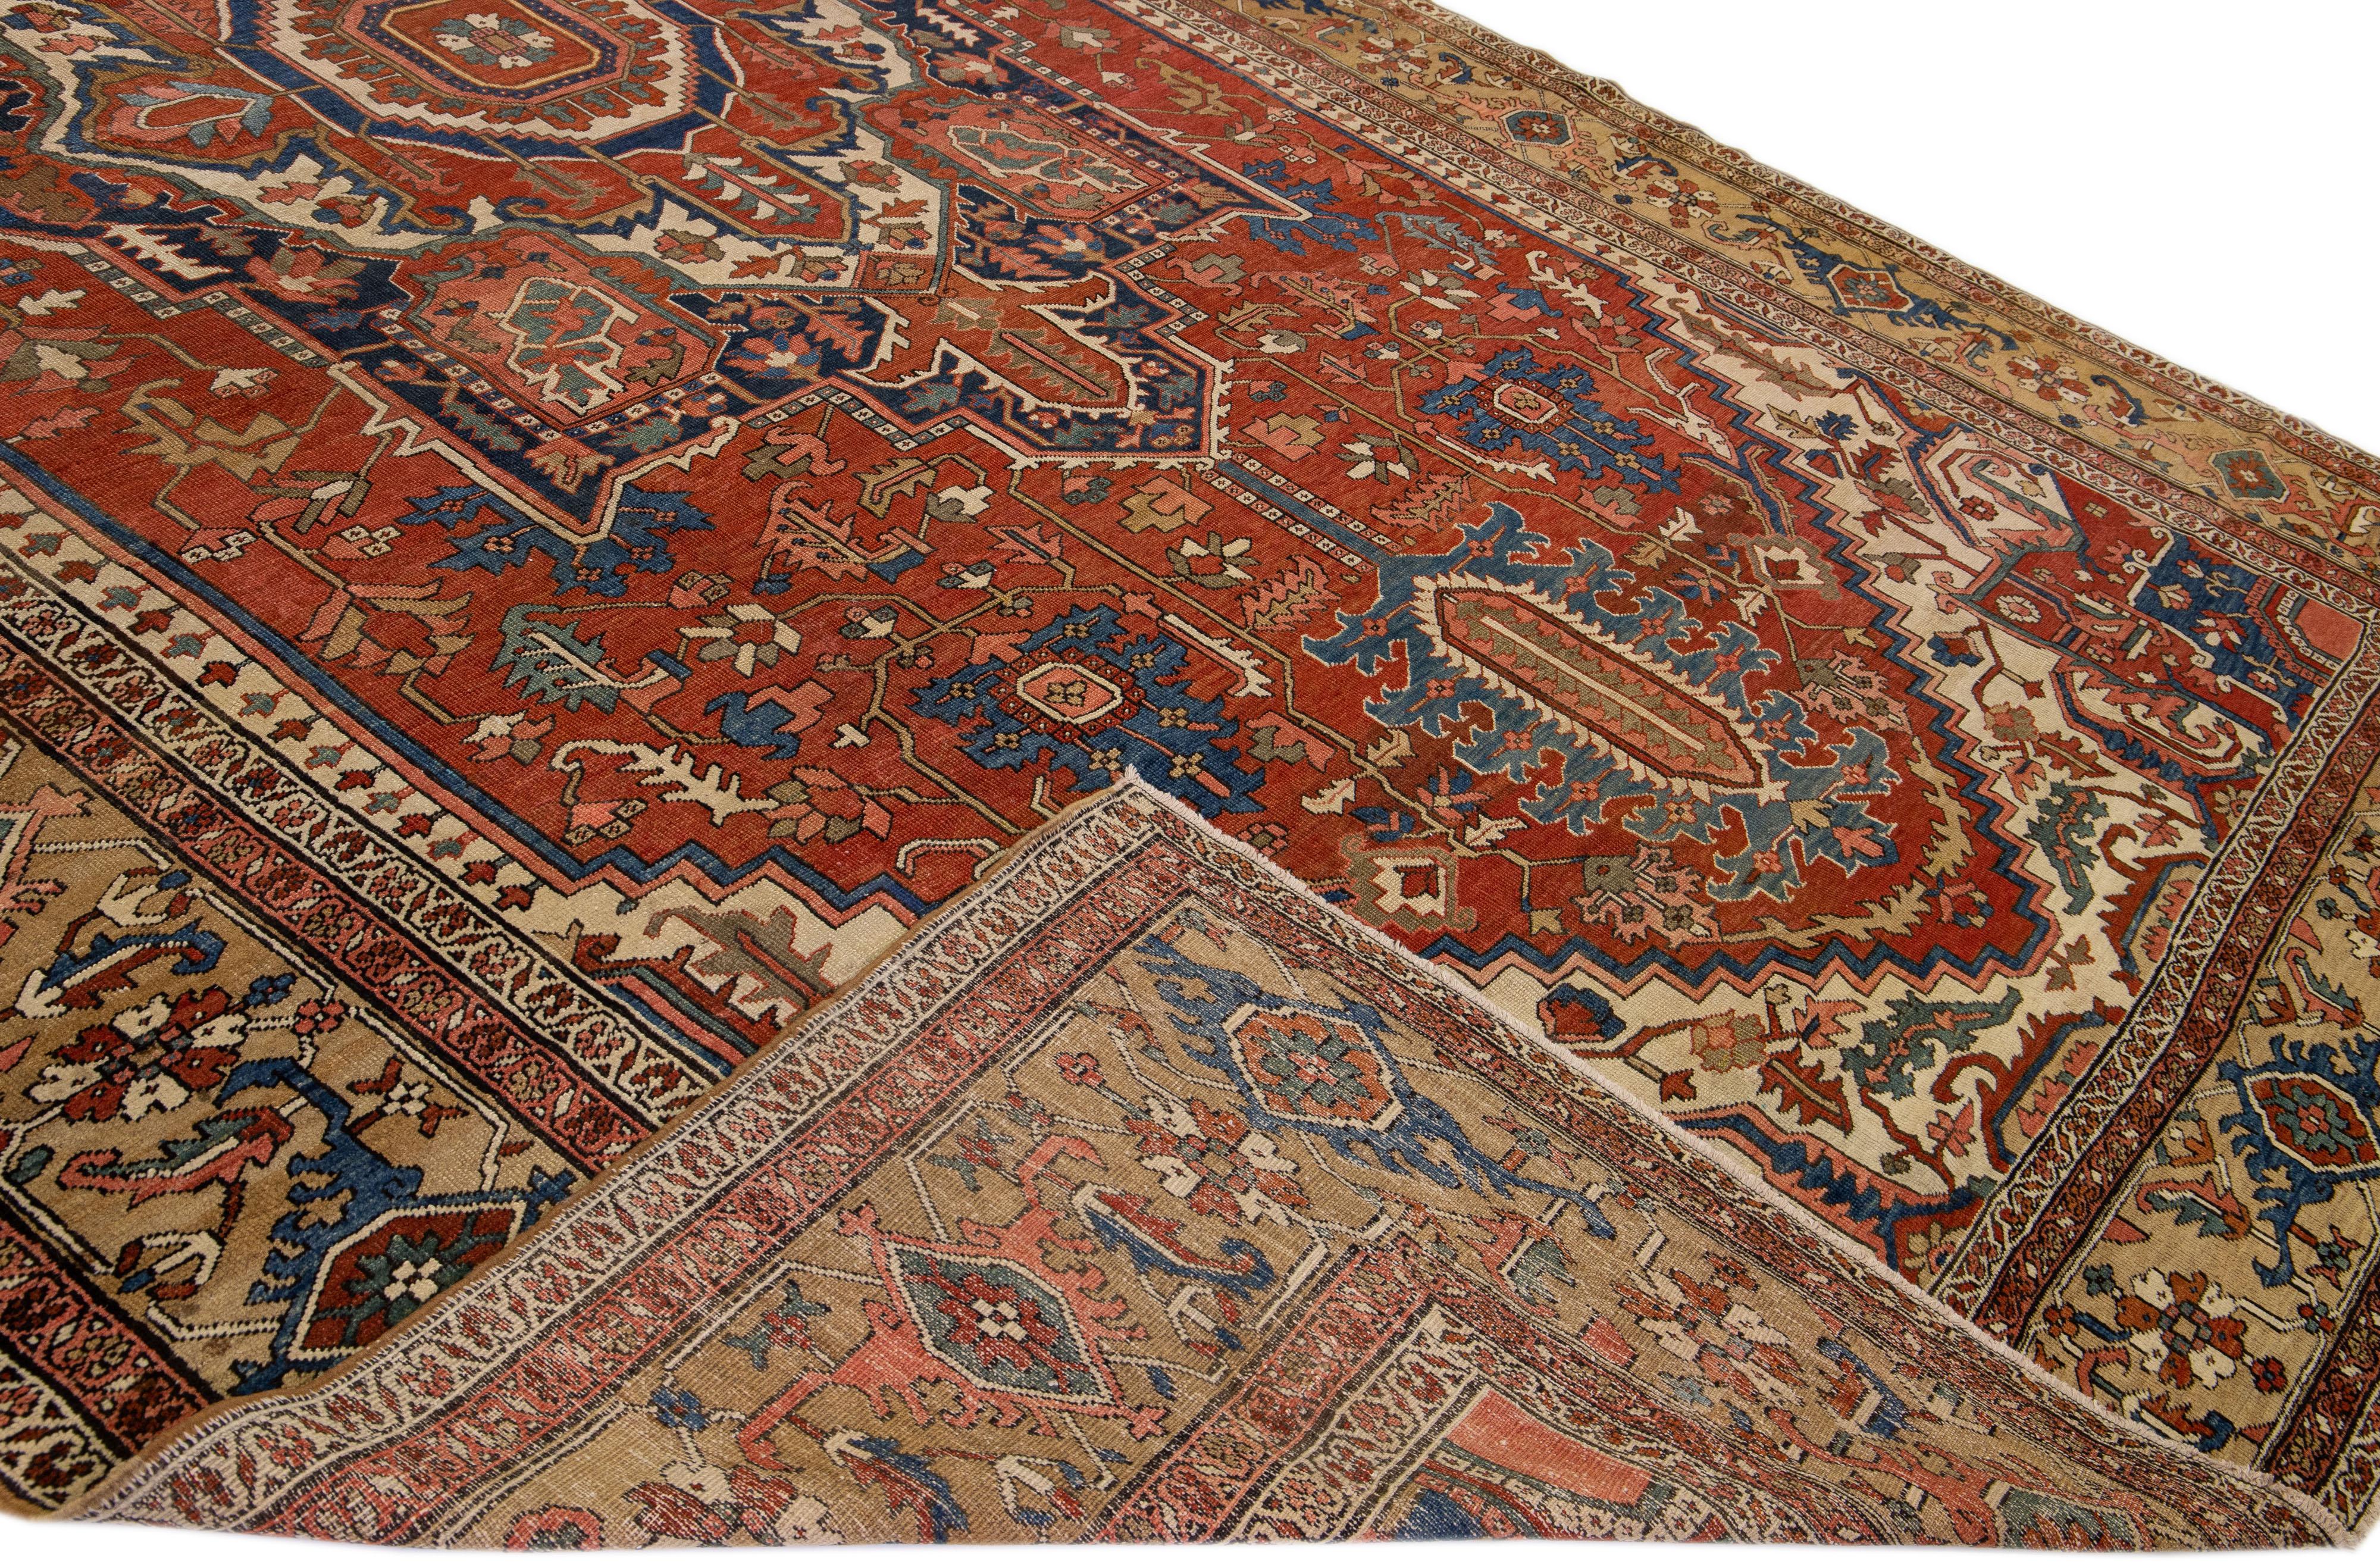 Beautiful Antique Serapi hand-knotted wool rug with a rust field. This Persian rug has a brown frame and multi-color accents in a gorgeous all-over geometric floral medallion design.

This rug measures: 11'7